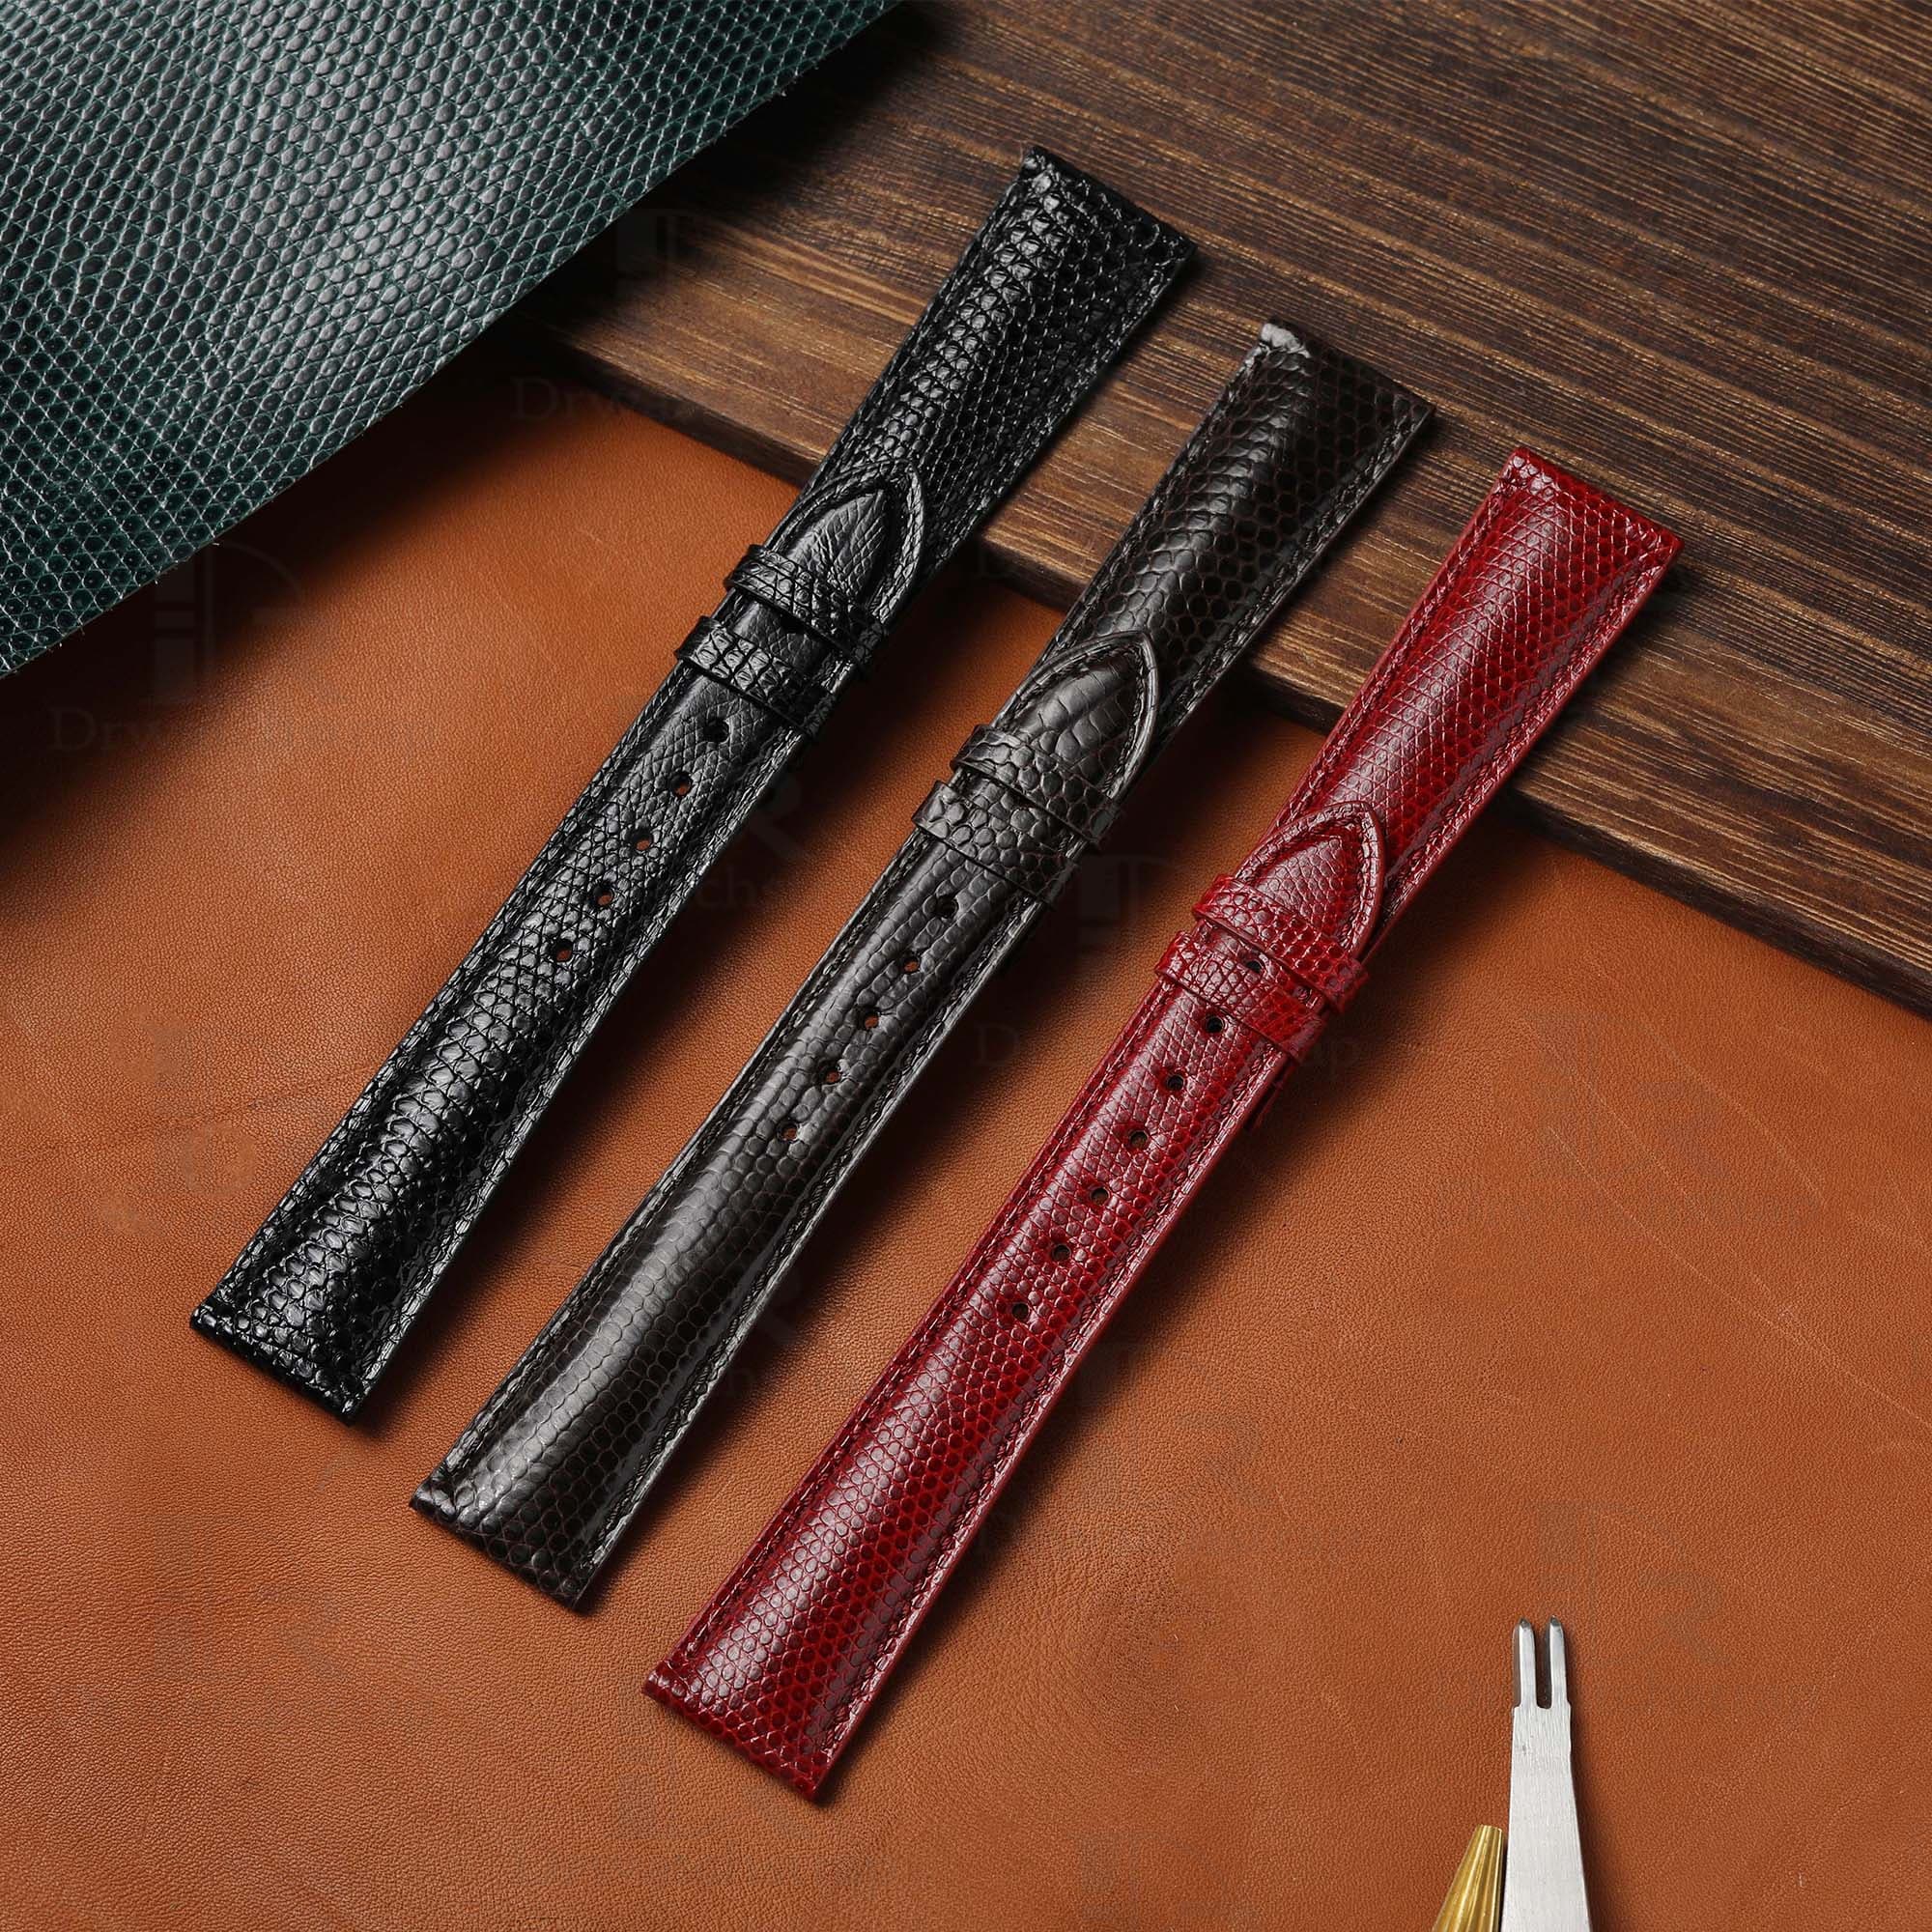 Shop the genuine best quality lizard skinleather material Black Red 20mm custom Rolex straps & watch bands replacement for Rolex luxury watches from DR watchstrap for sale at a low price - shop the premium Grade A leather watch strap and watch band online at a discount price